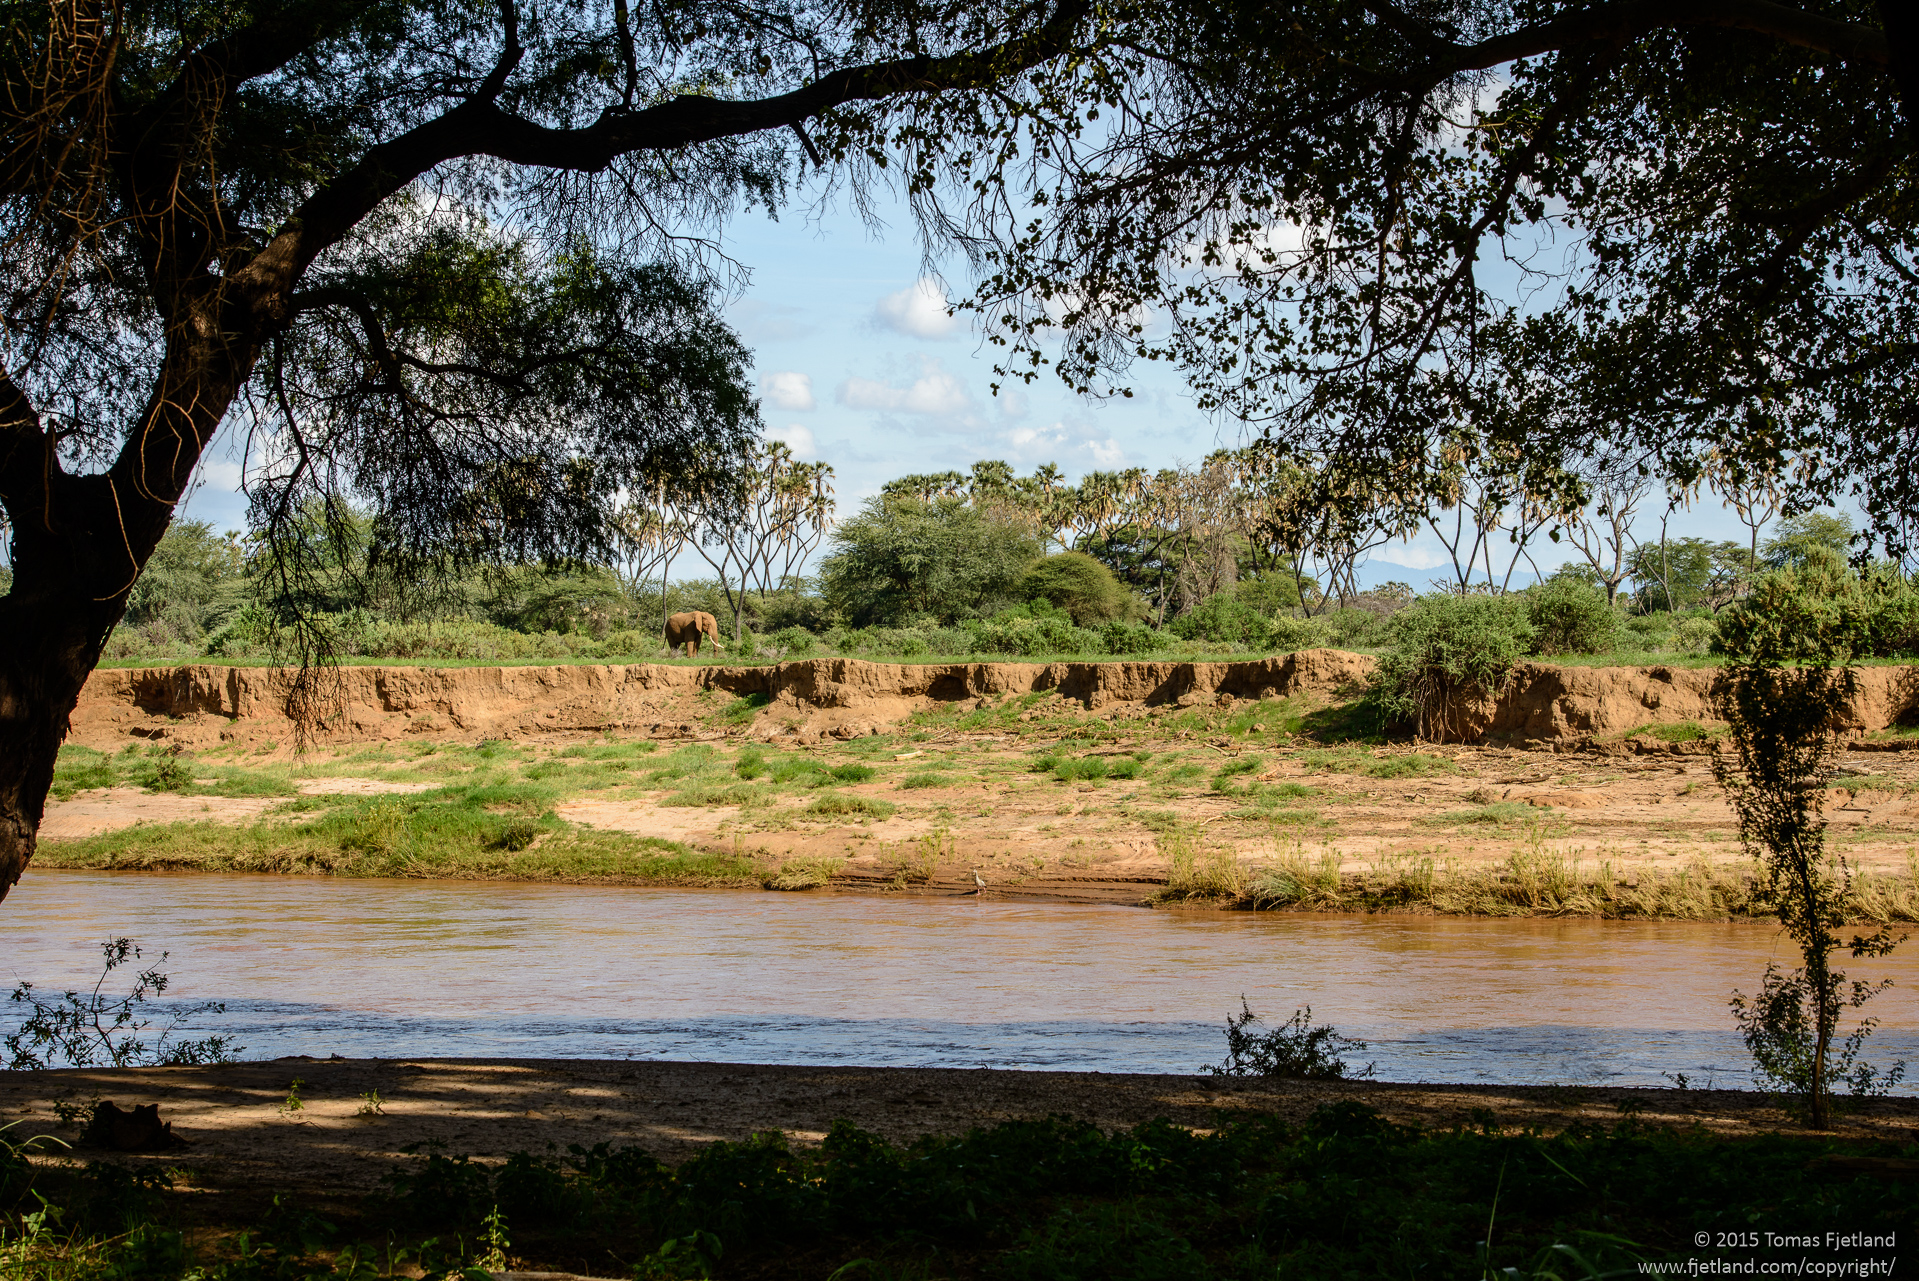 View from the "porch" of my tent at Larsens camp in Samburu